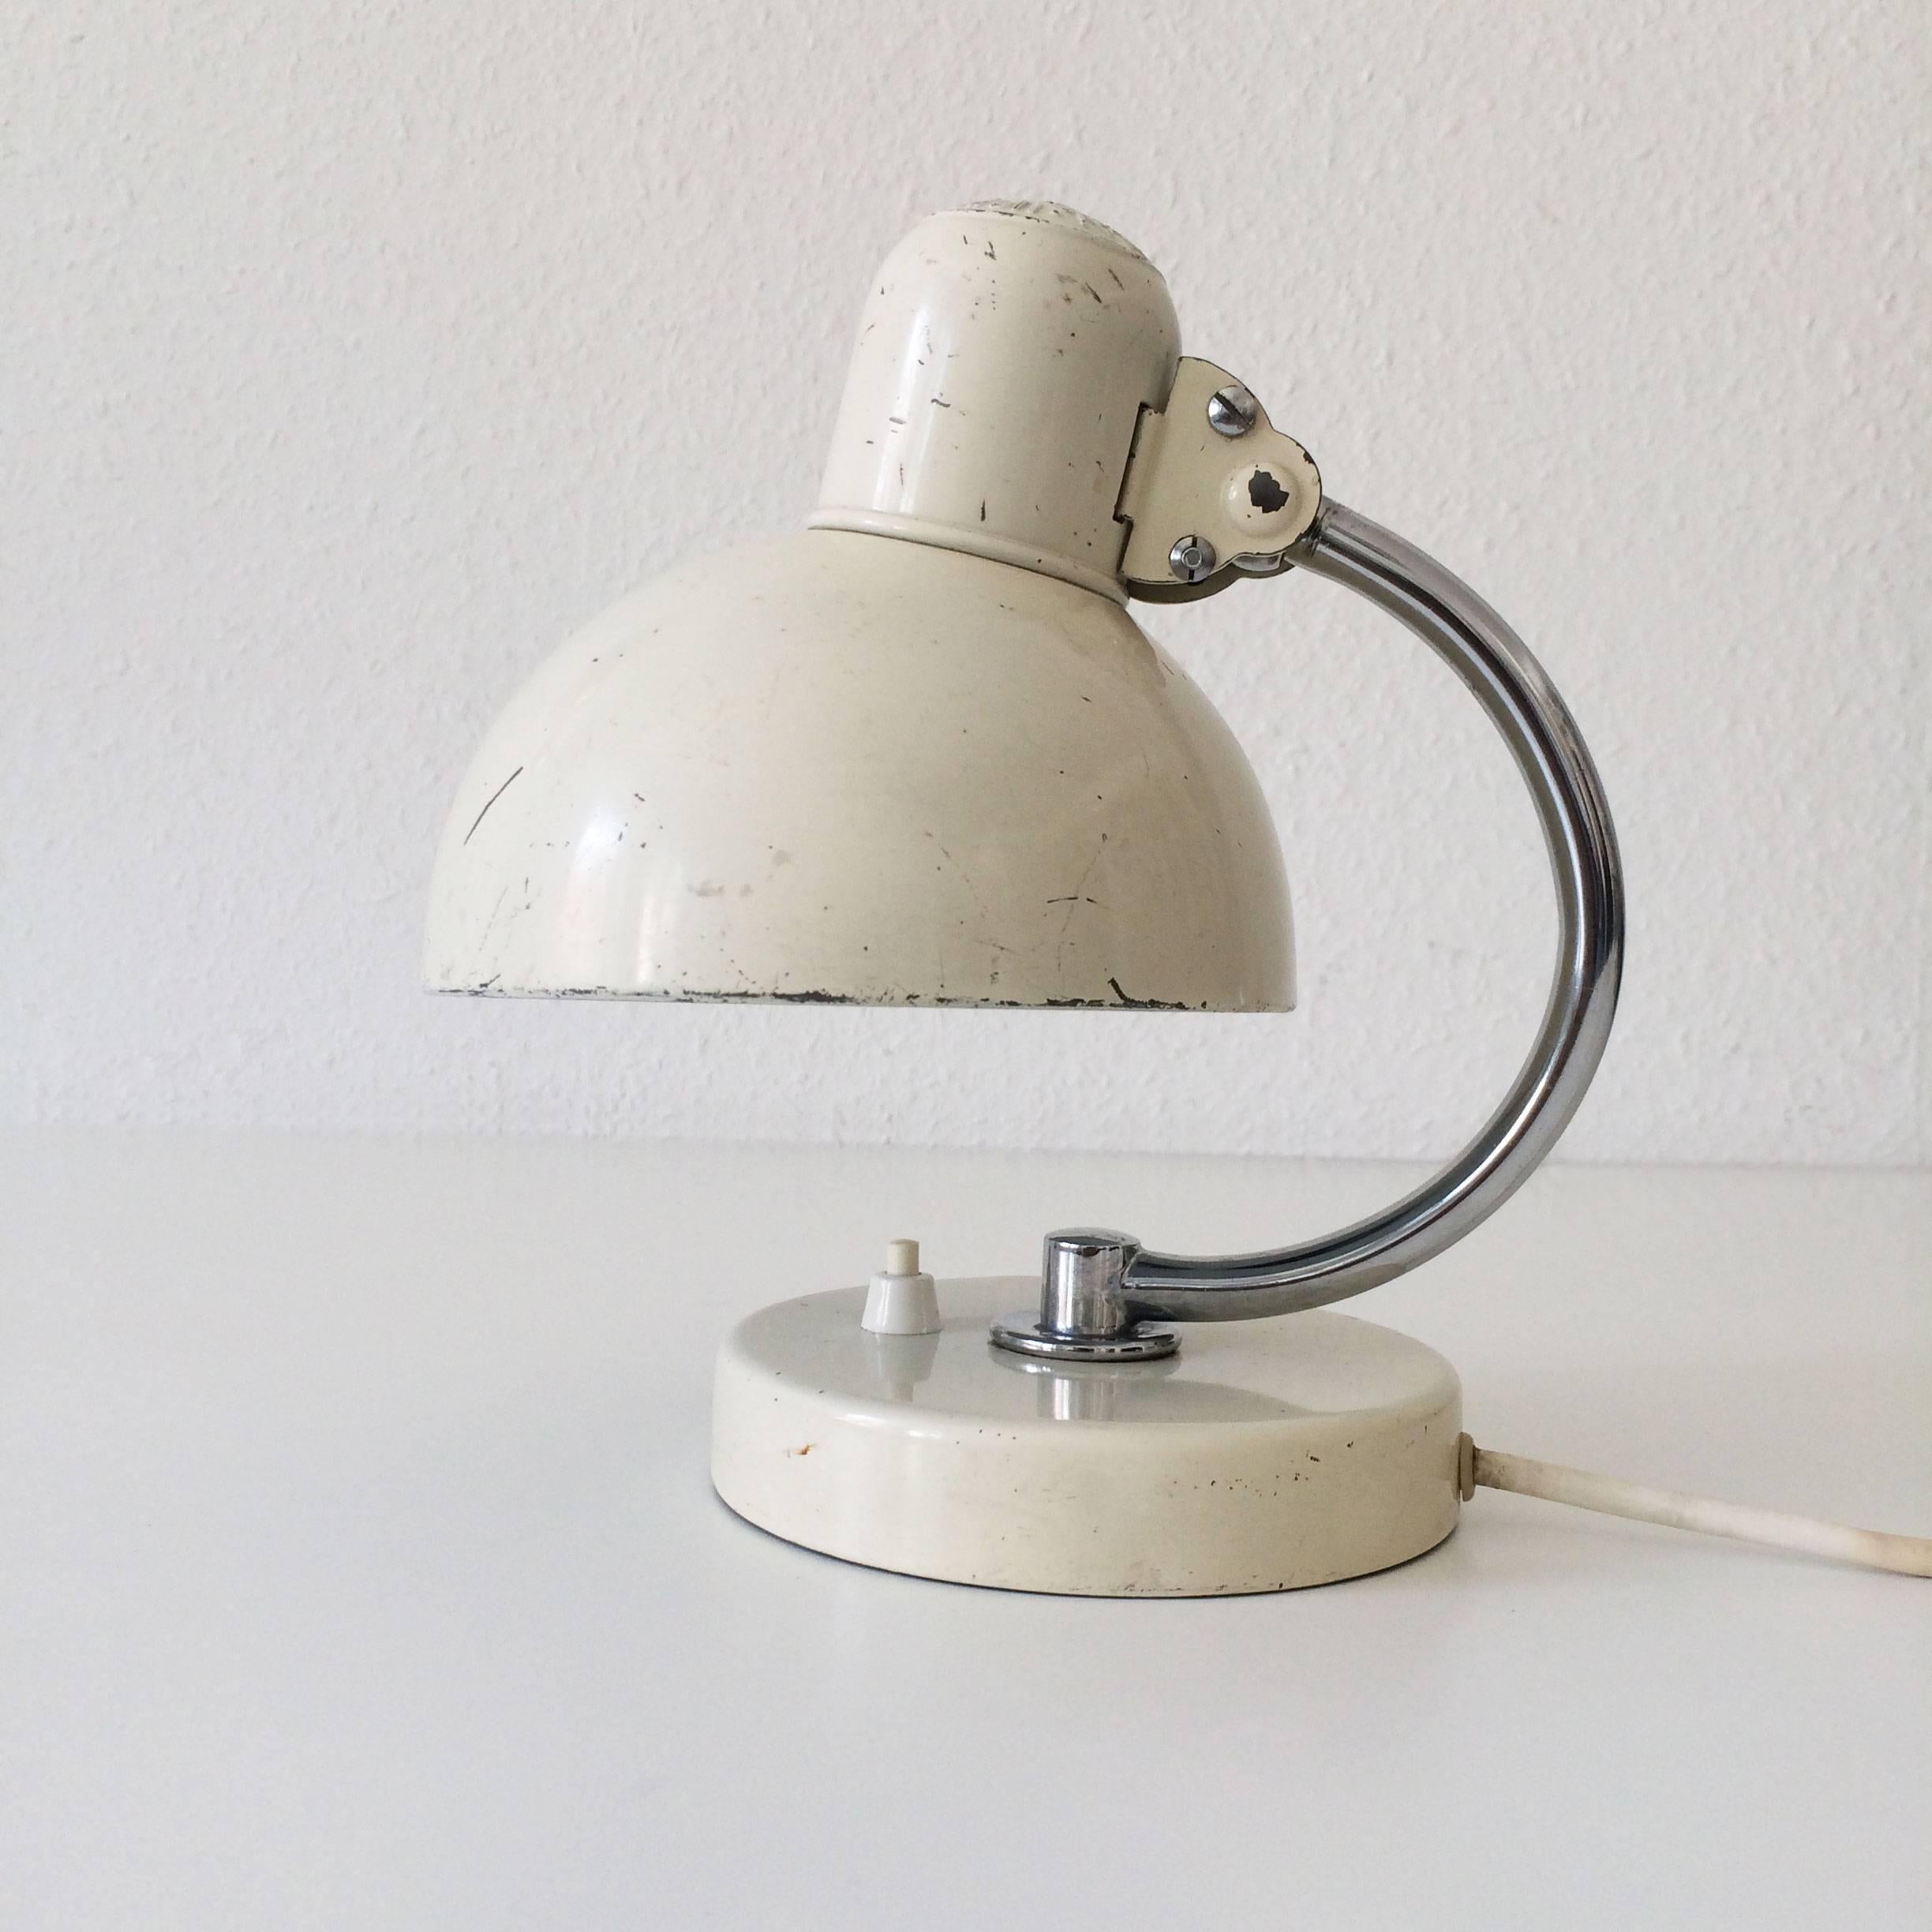 Metal Bauhaus Bedside Table Lamps Kaiser Idell 6722 by Christian Dell, 1930s